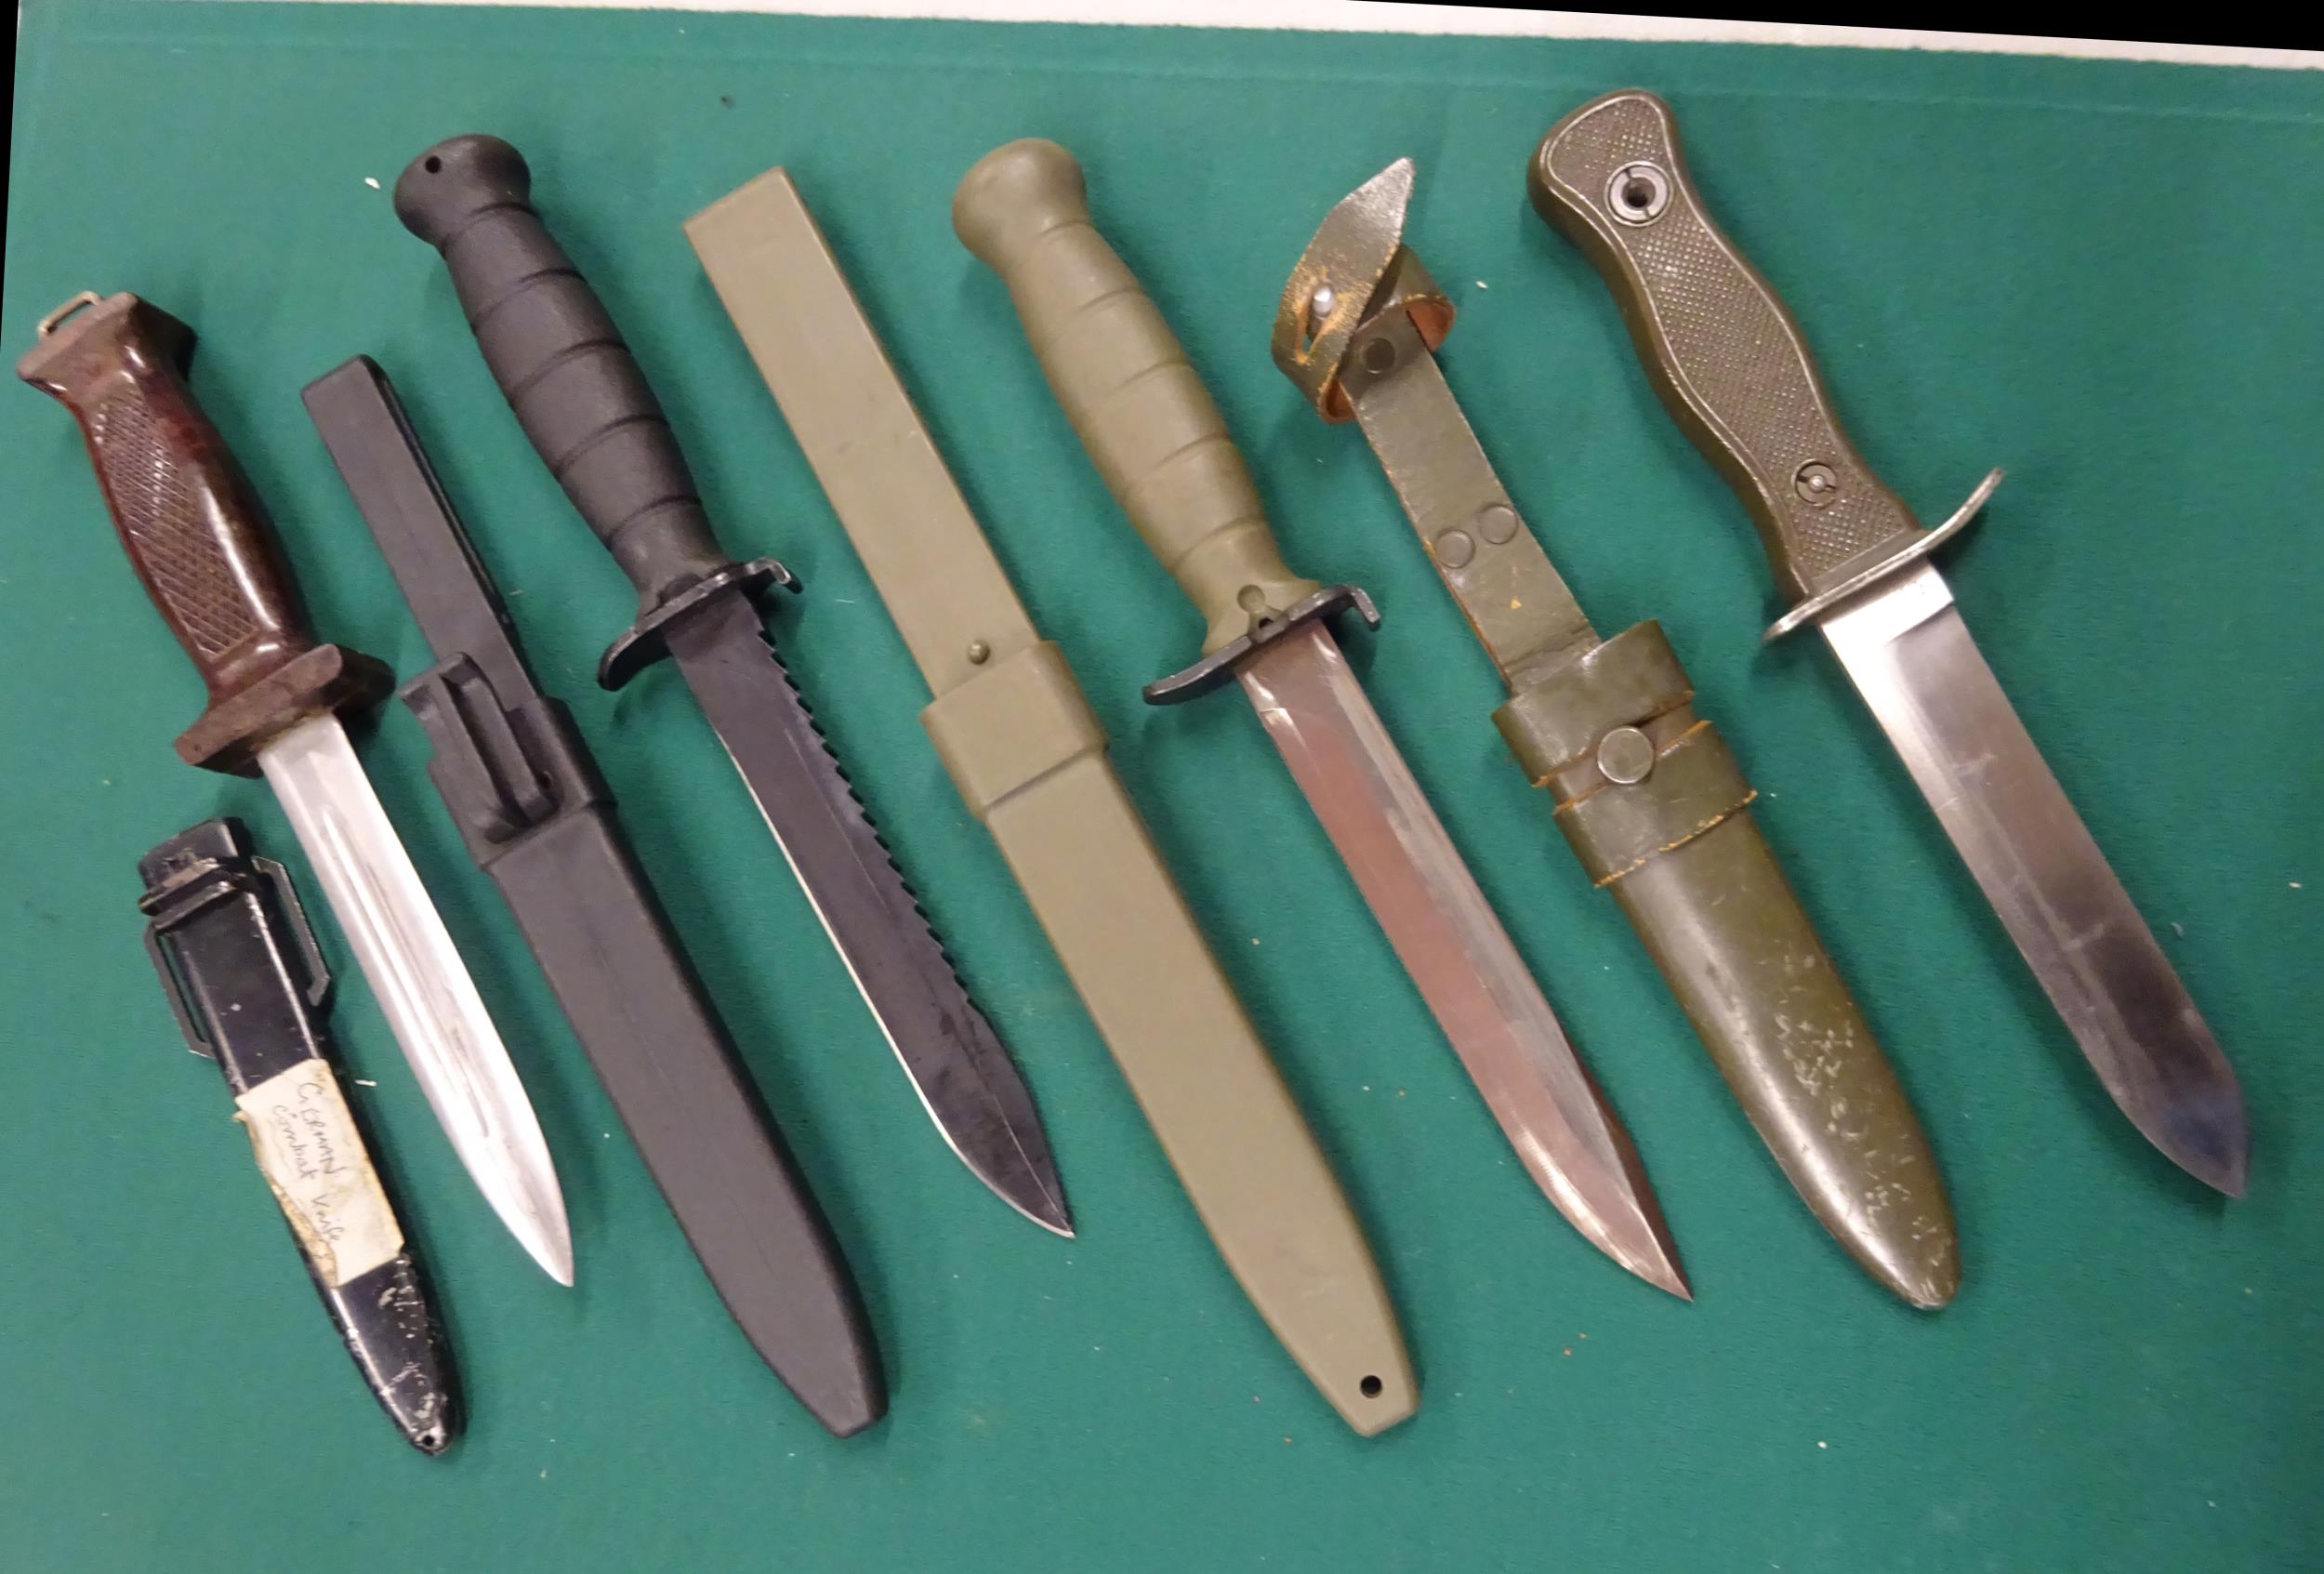 A Wilkinson survival knife c 1970, 2 German combat knives; 2 other Continental survival knives. - Image 4 of 6